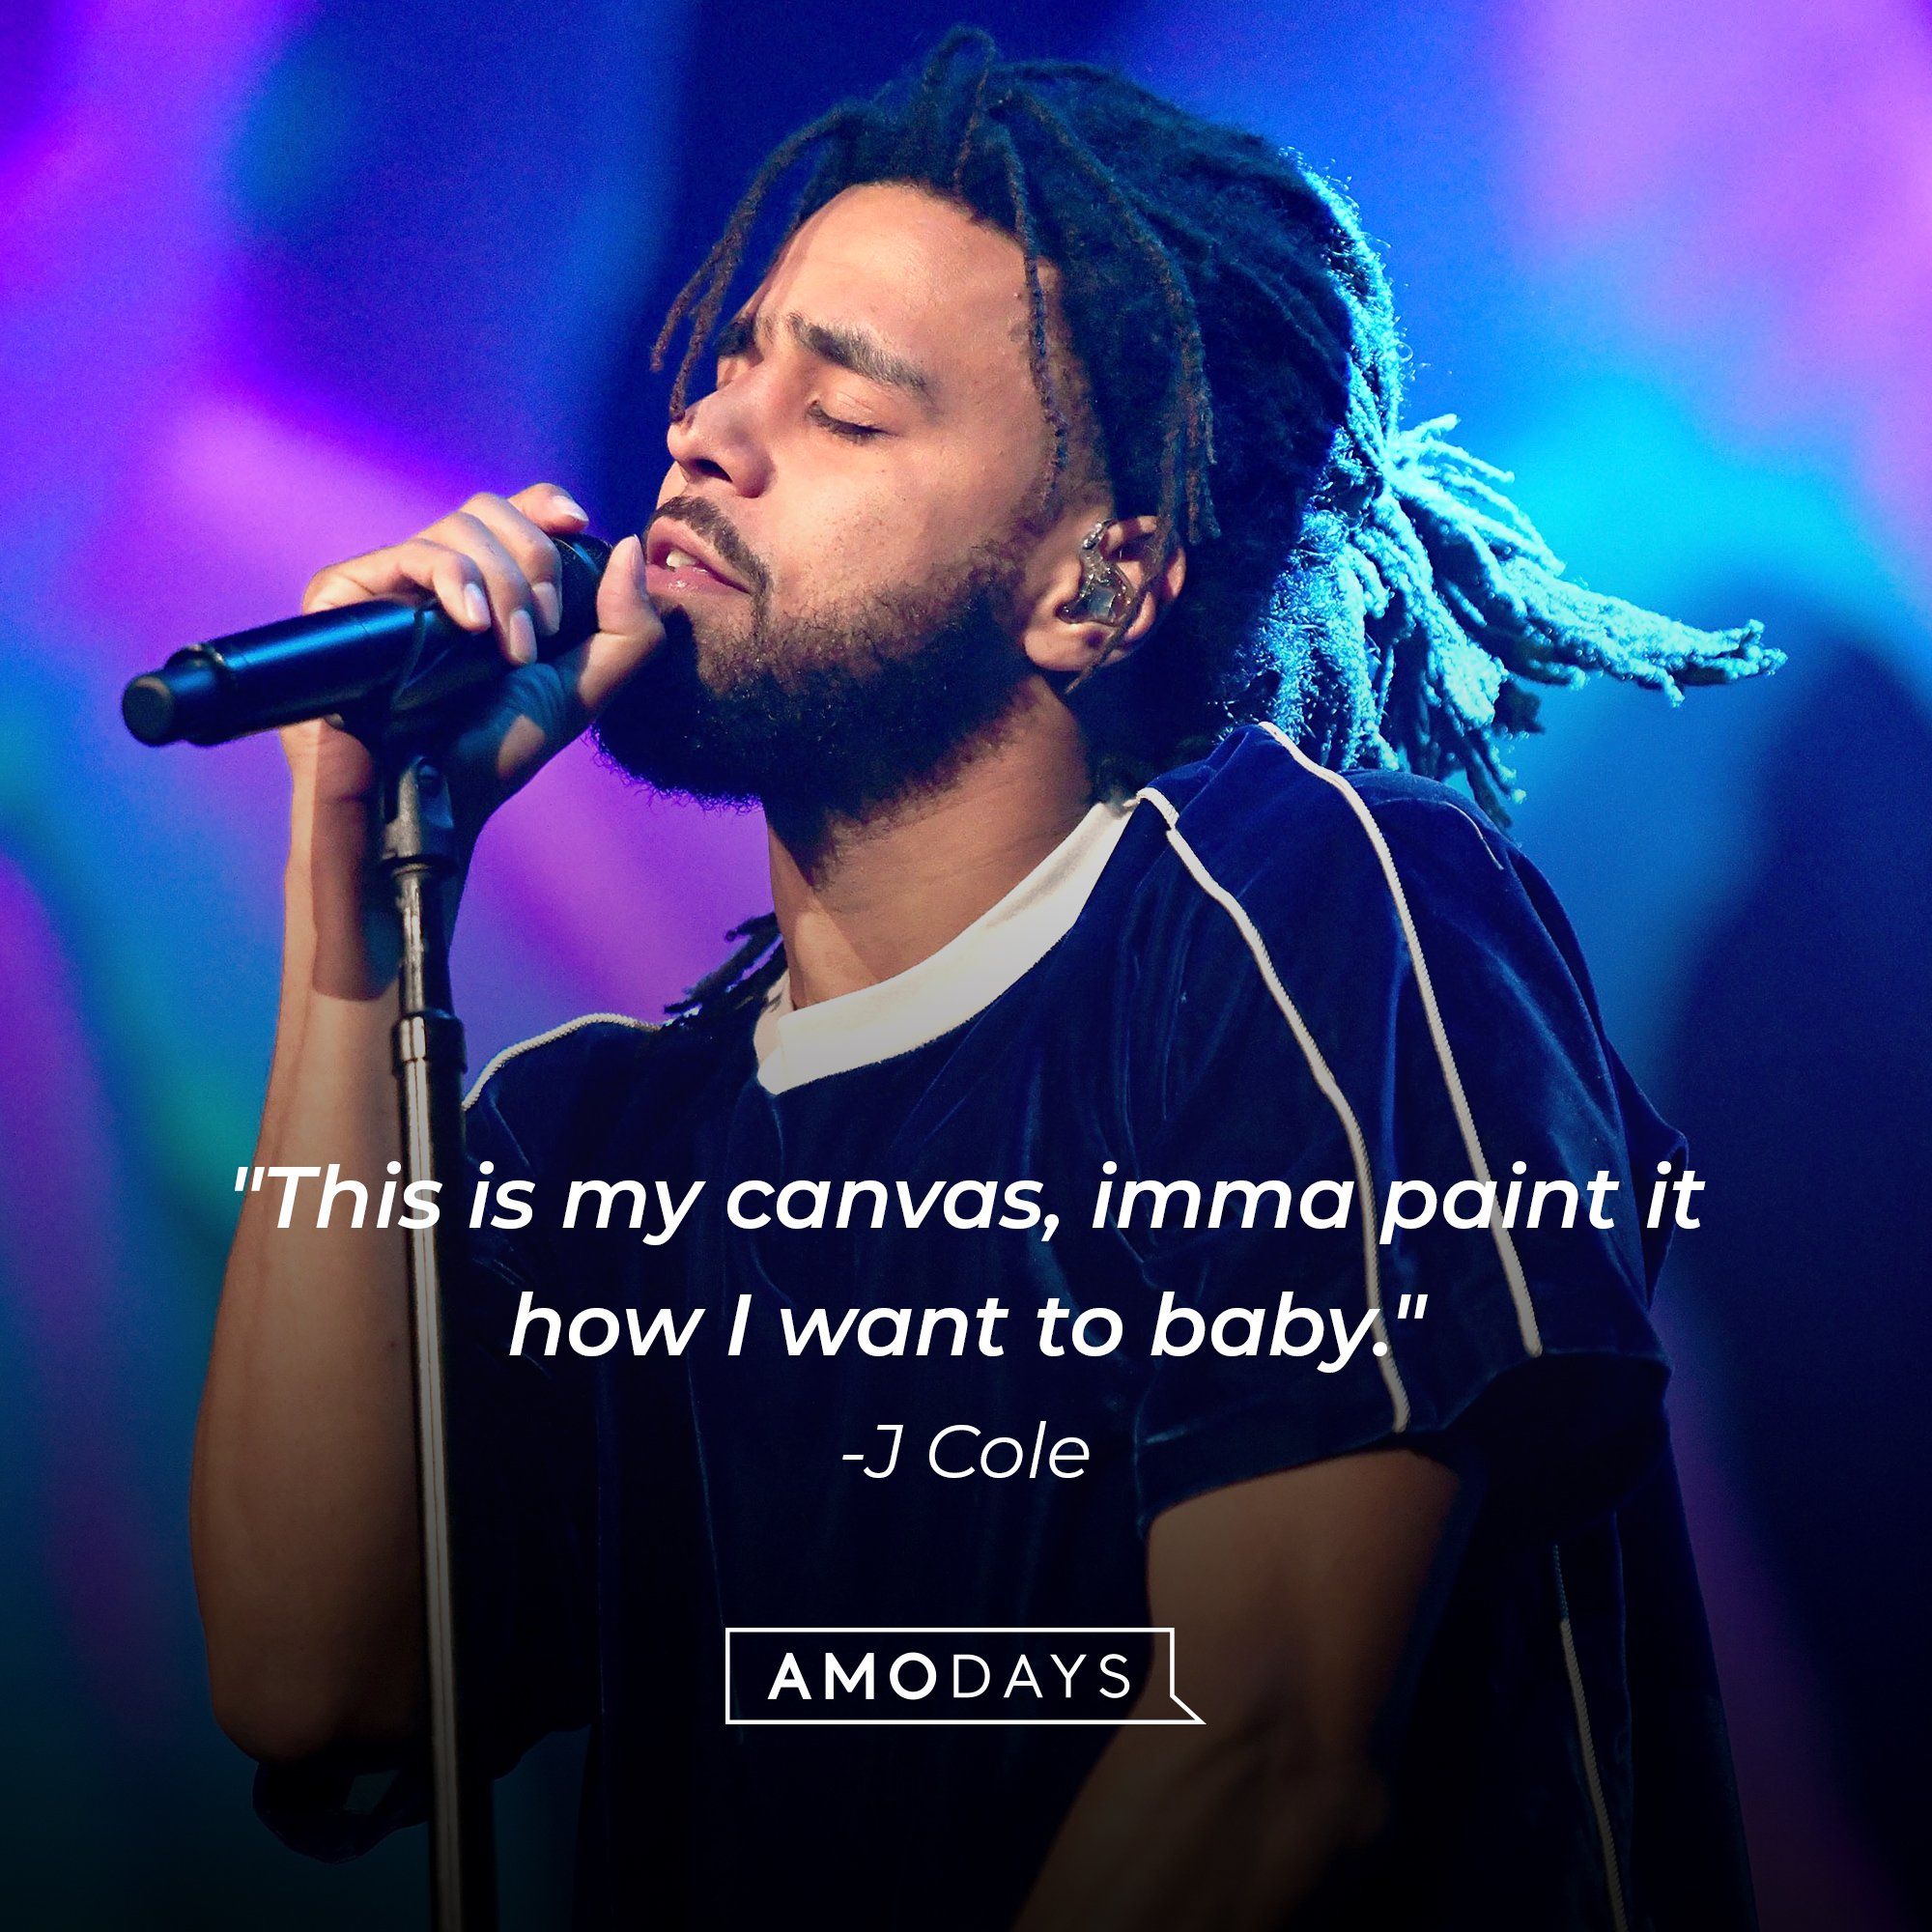 J Cole's quote: "This is my canvas, imma paint it how I want to baby." | Image: AmoDays